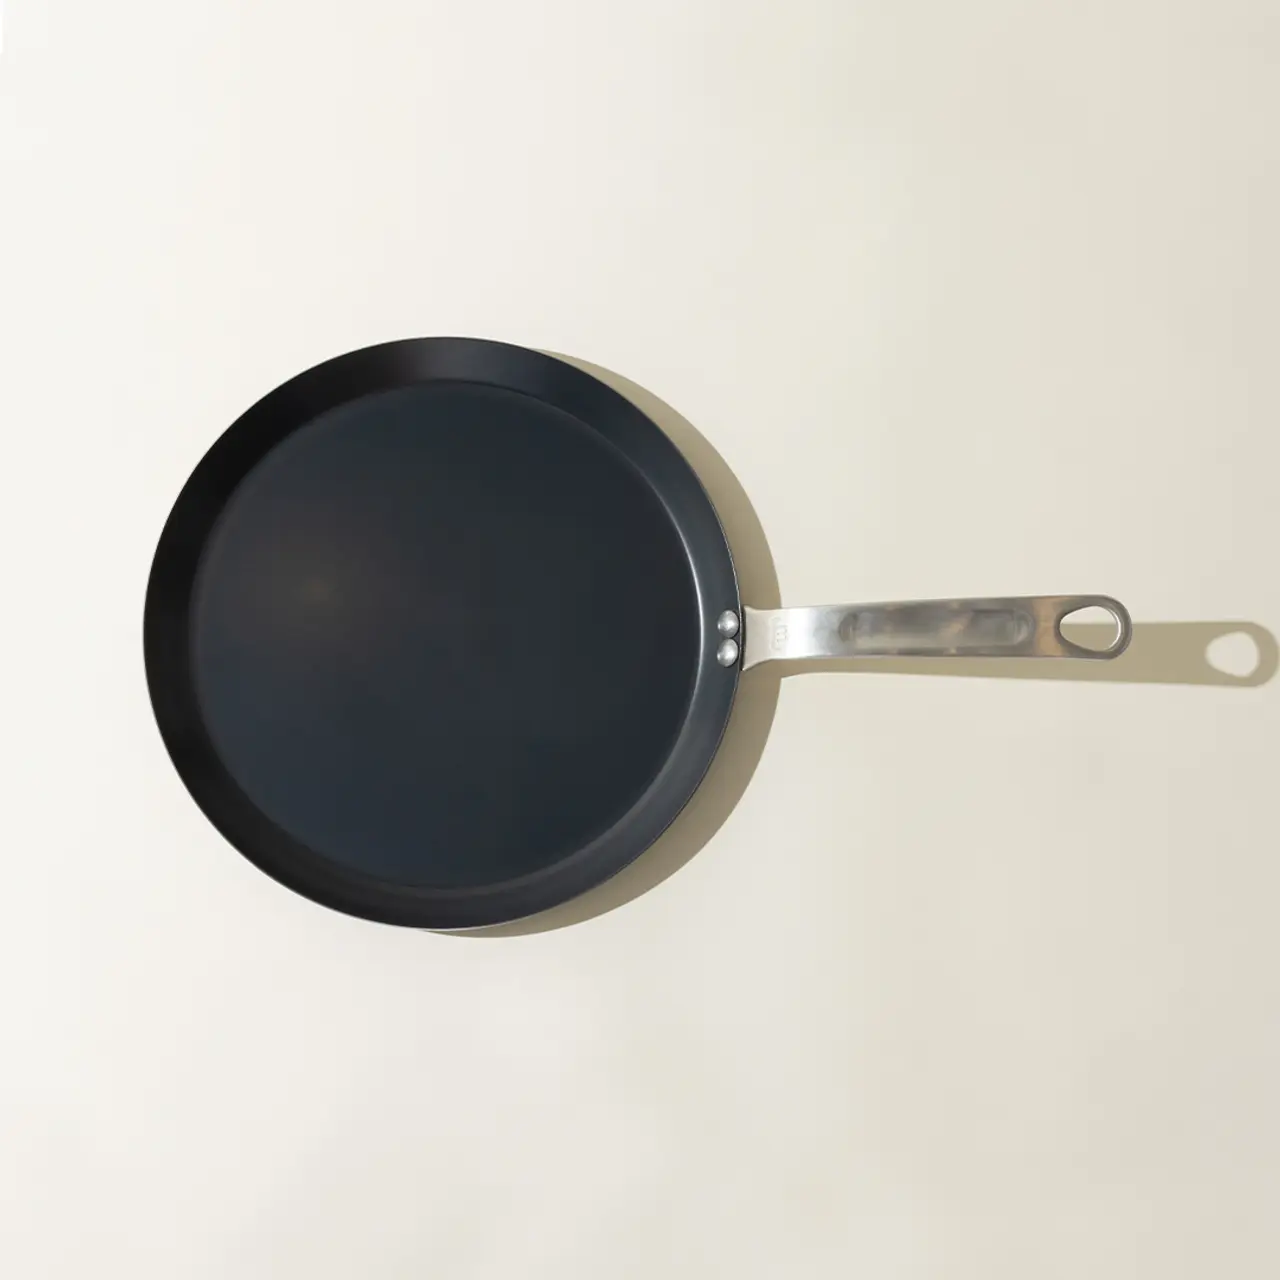 A new non-stick frying pan with a silver-colored handle placed against a neutral background.